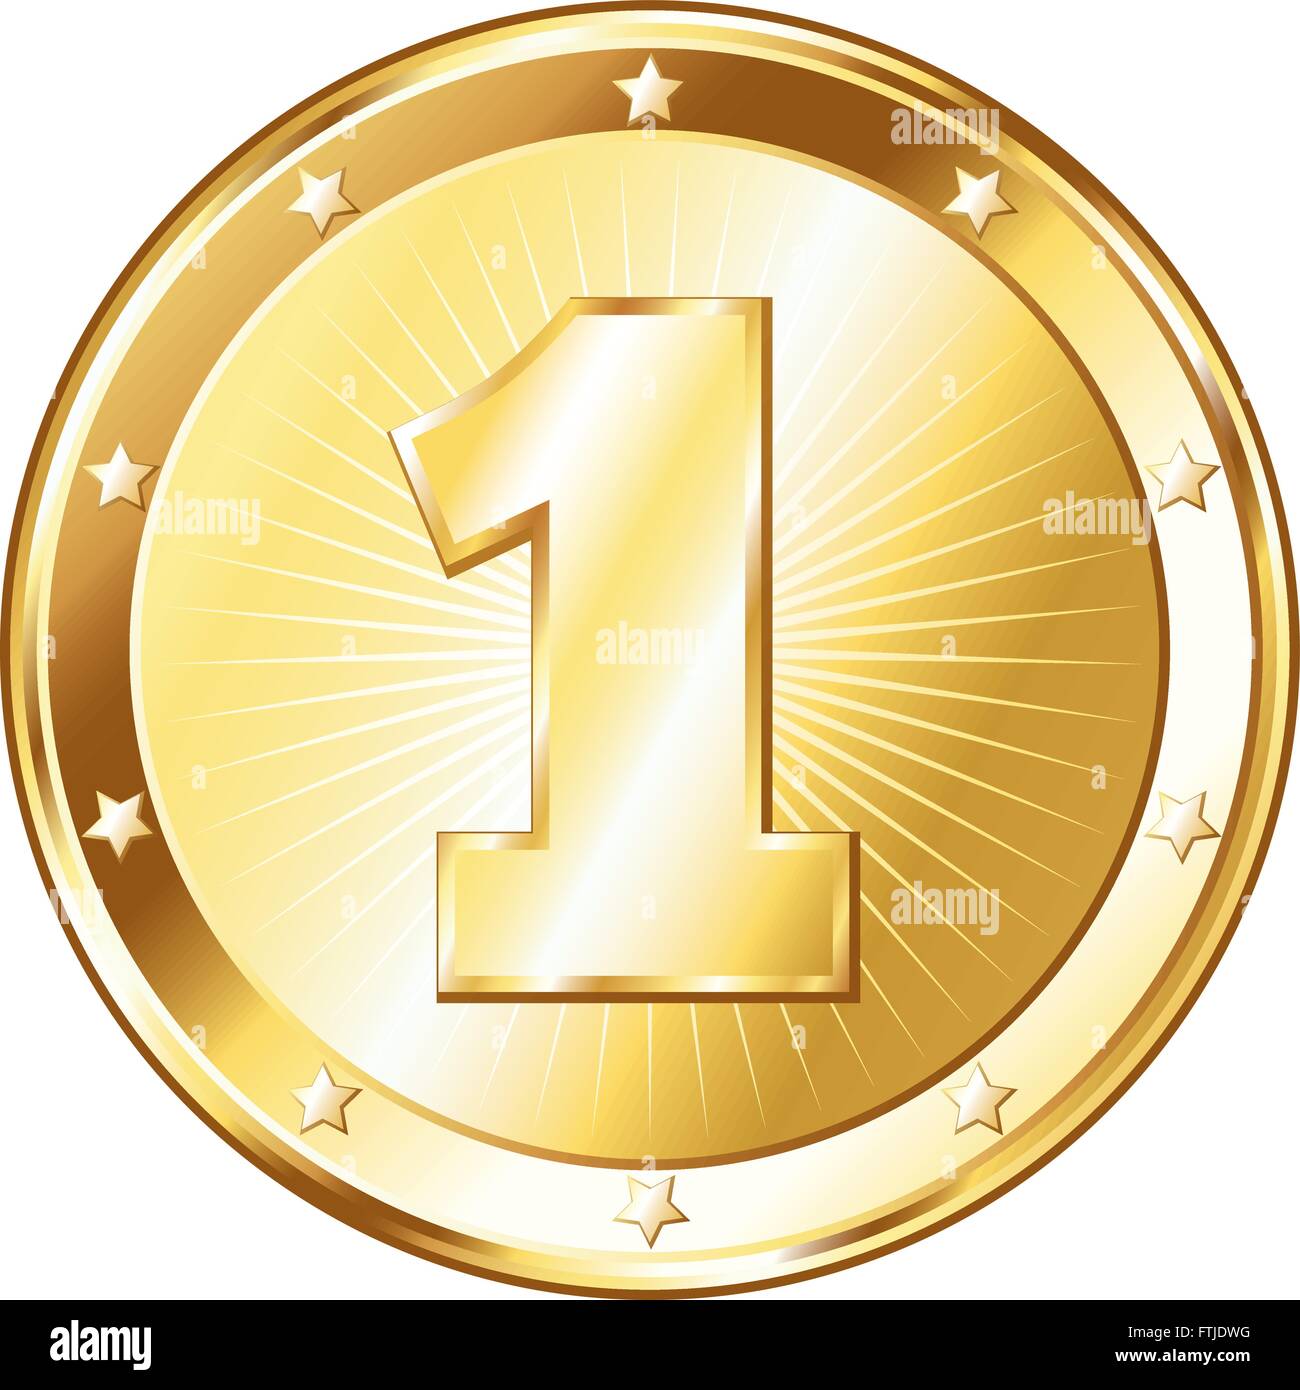 Round circle shaped metal badge / seal of approval in a gold look and the number one. Stock Vector